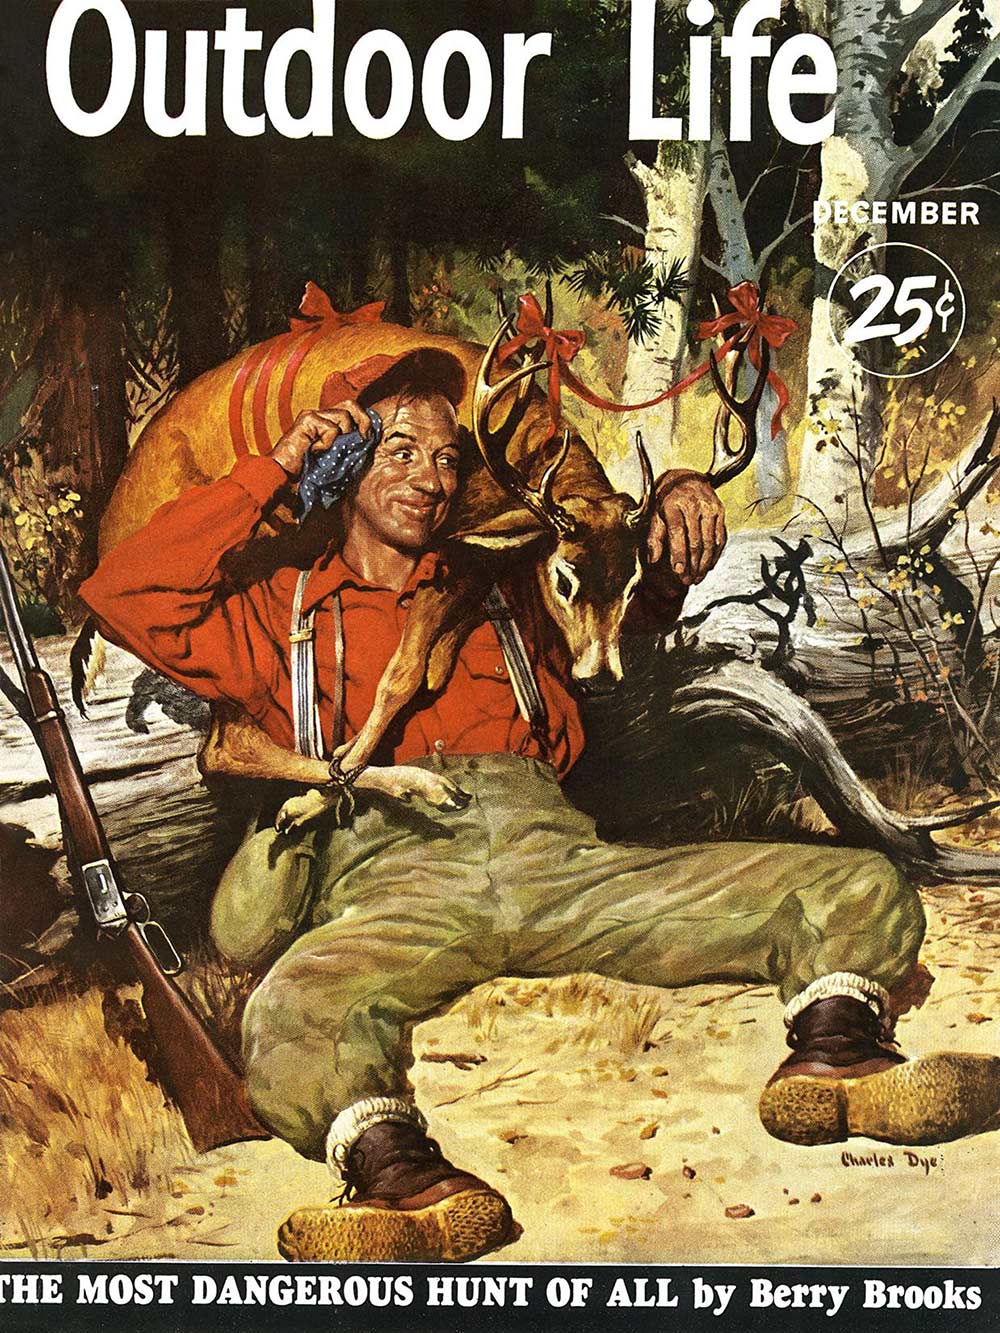 December 1951 Cover of Outdoor Life